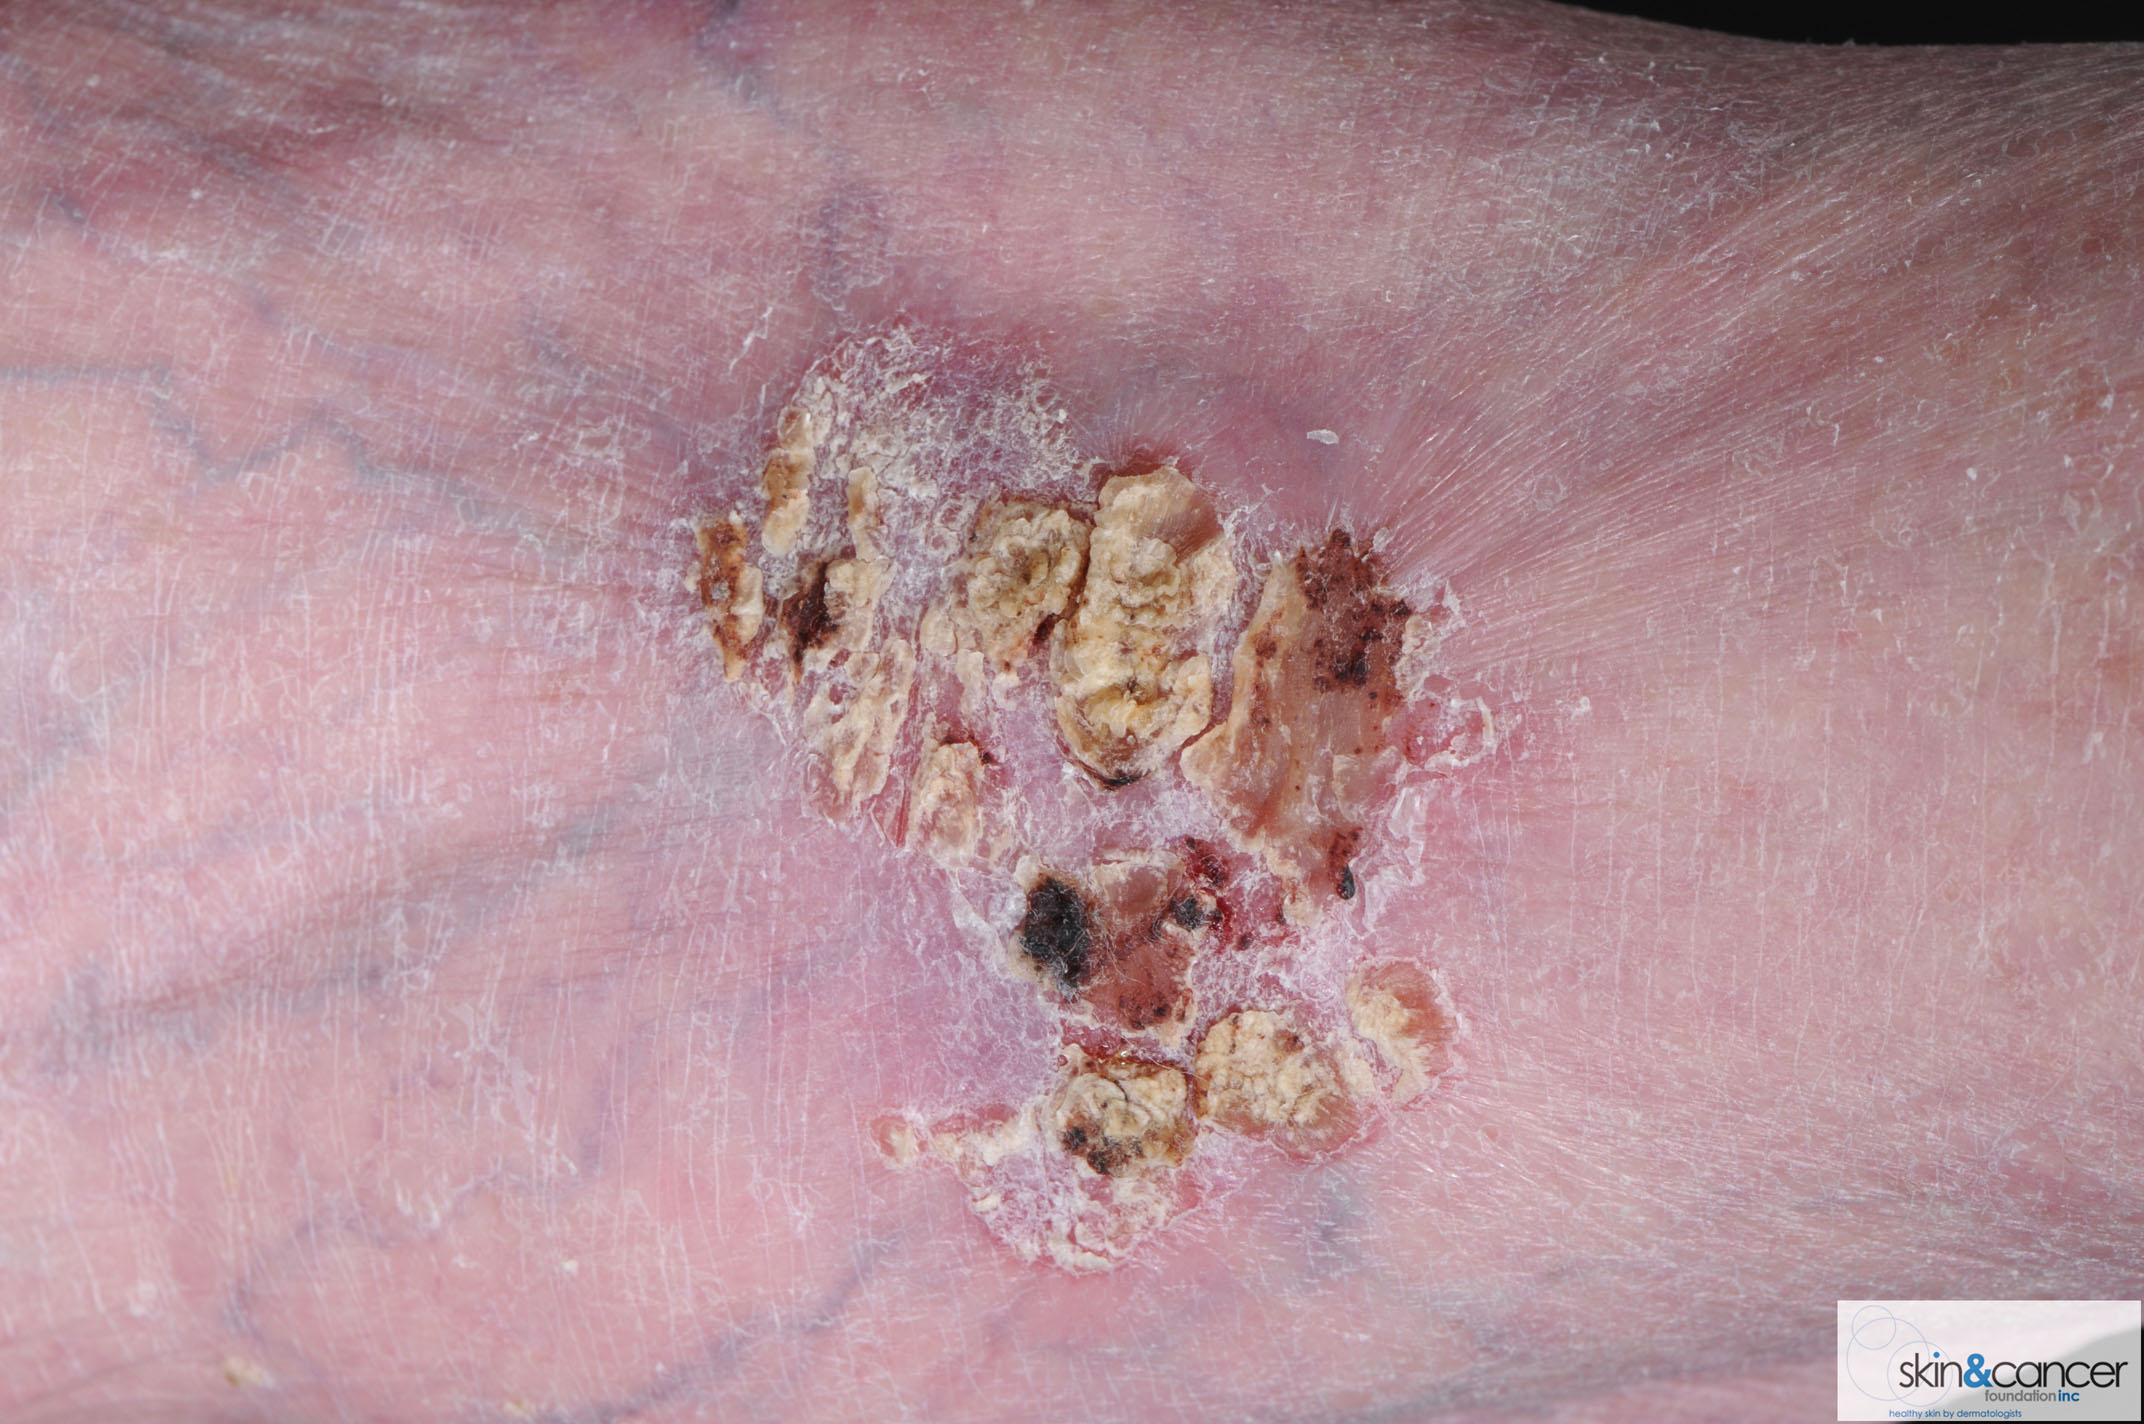 Skin Cancer Foundation - Squamous Cell Carcinoma